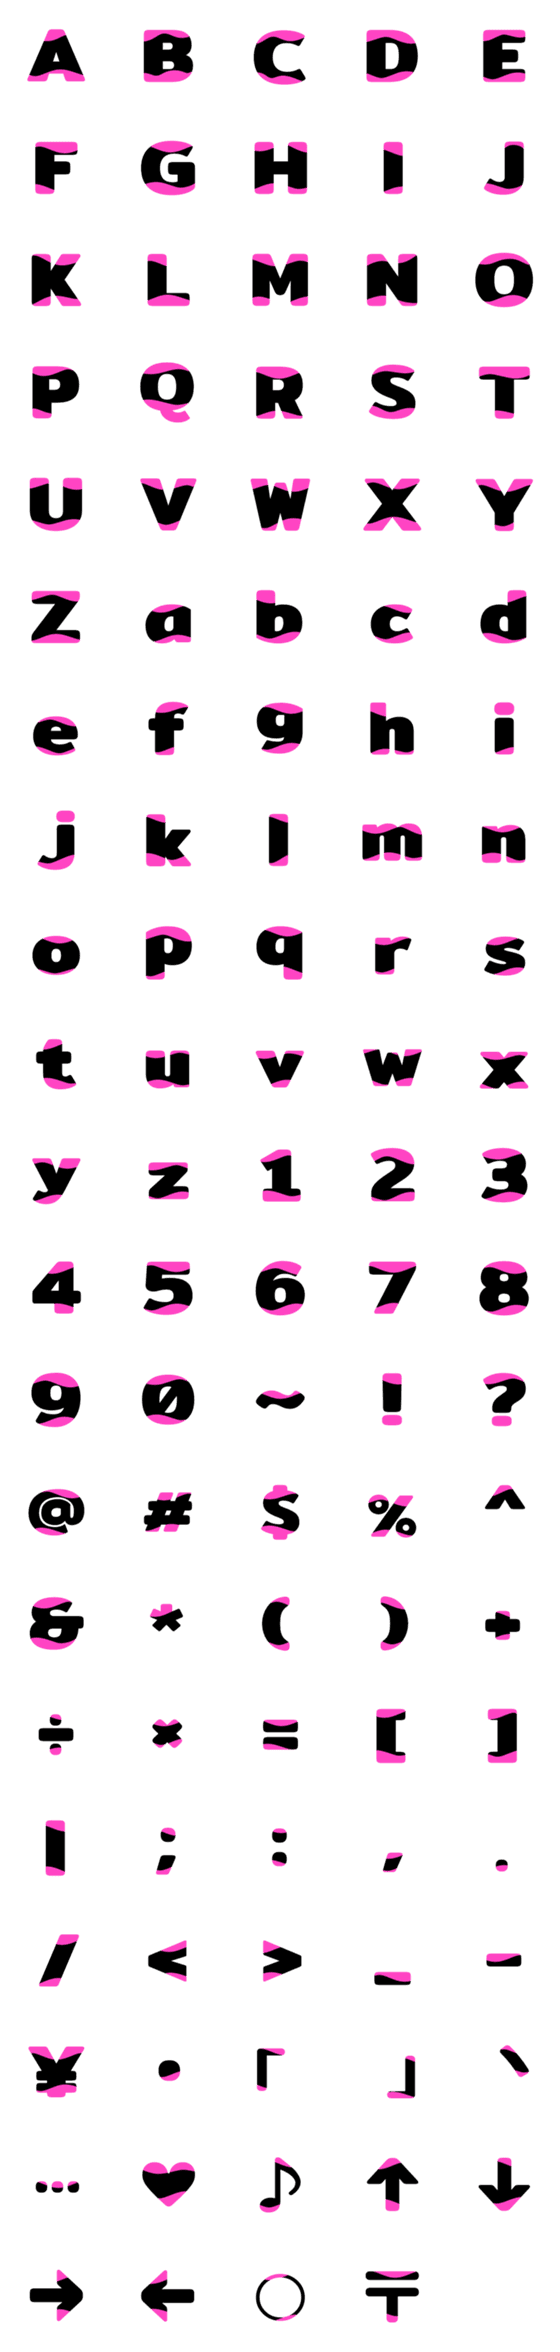 [LINE絵文字]English alphabet with pink curve insideの画像一覧